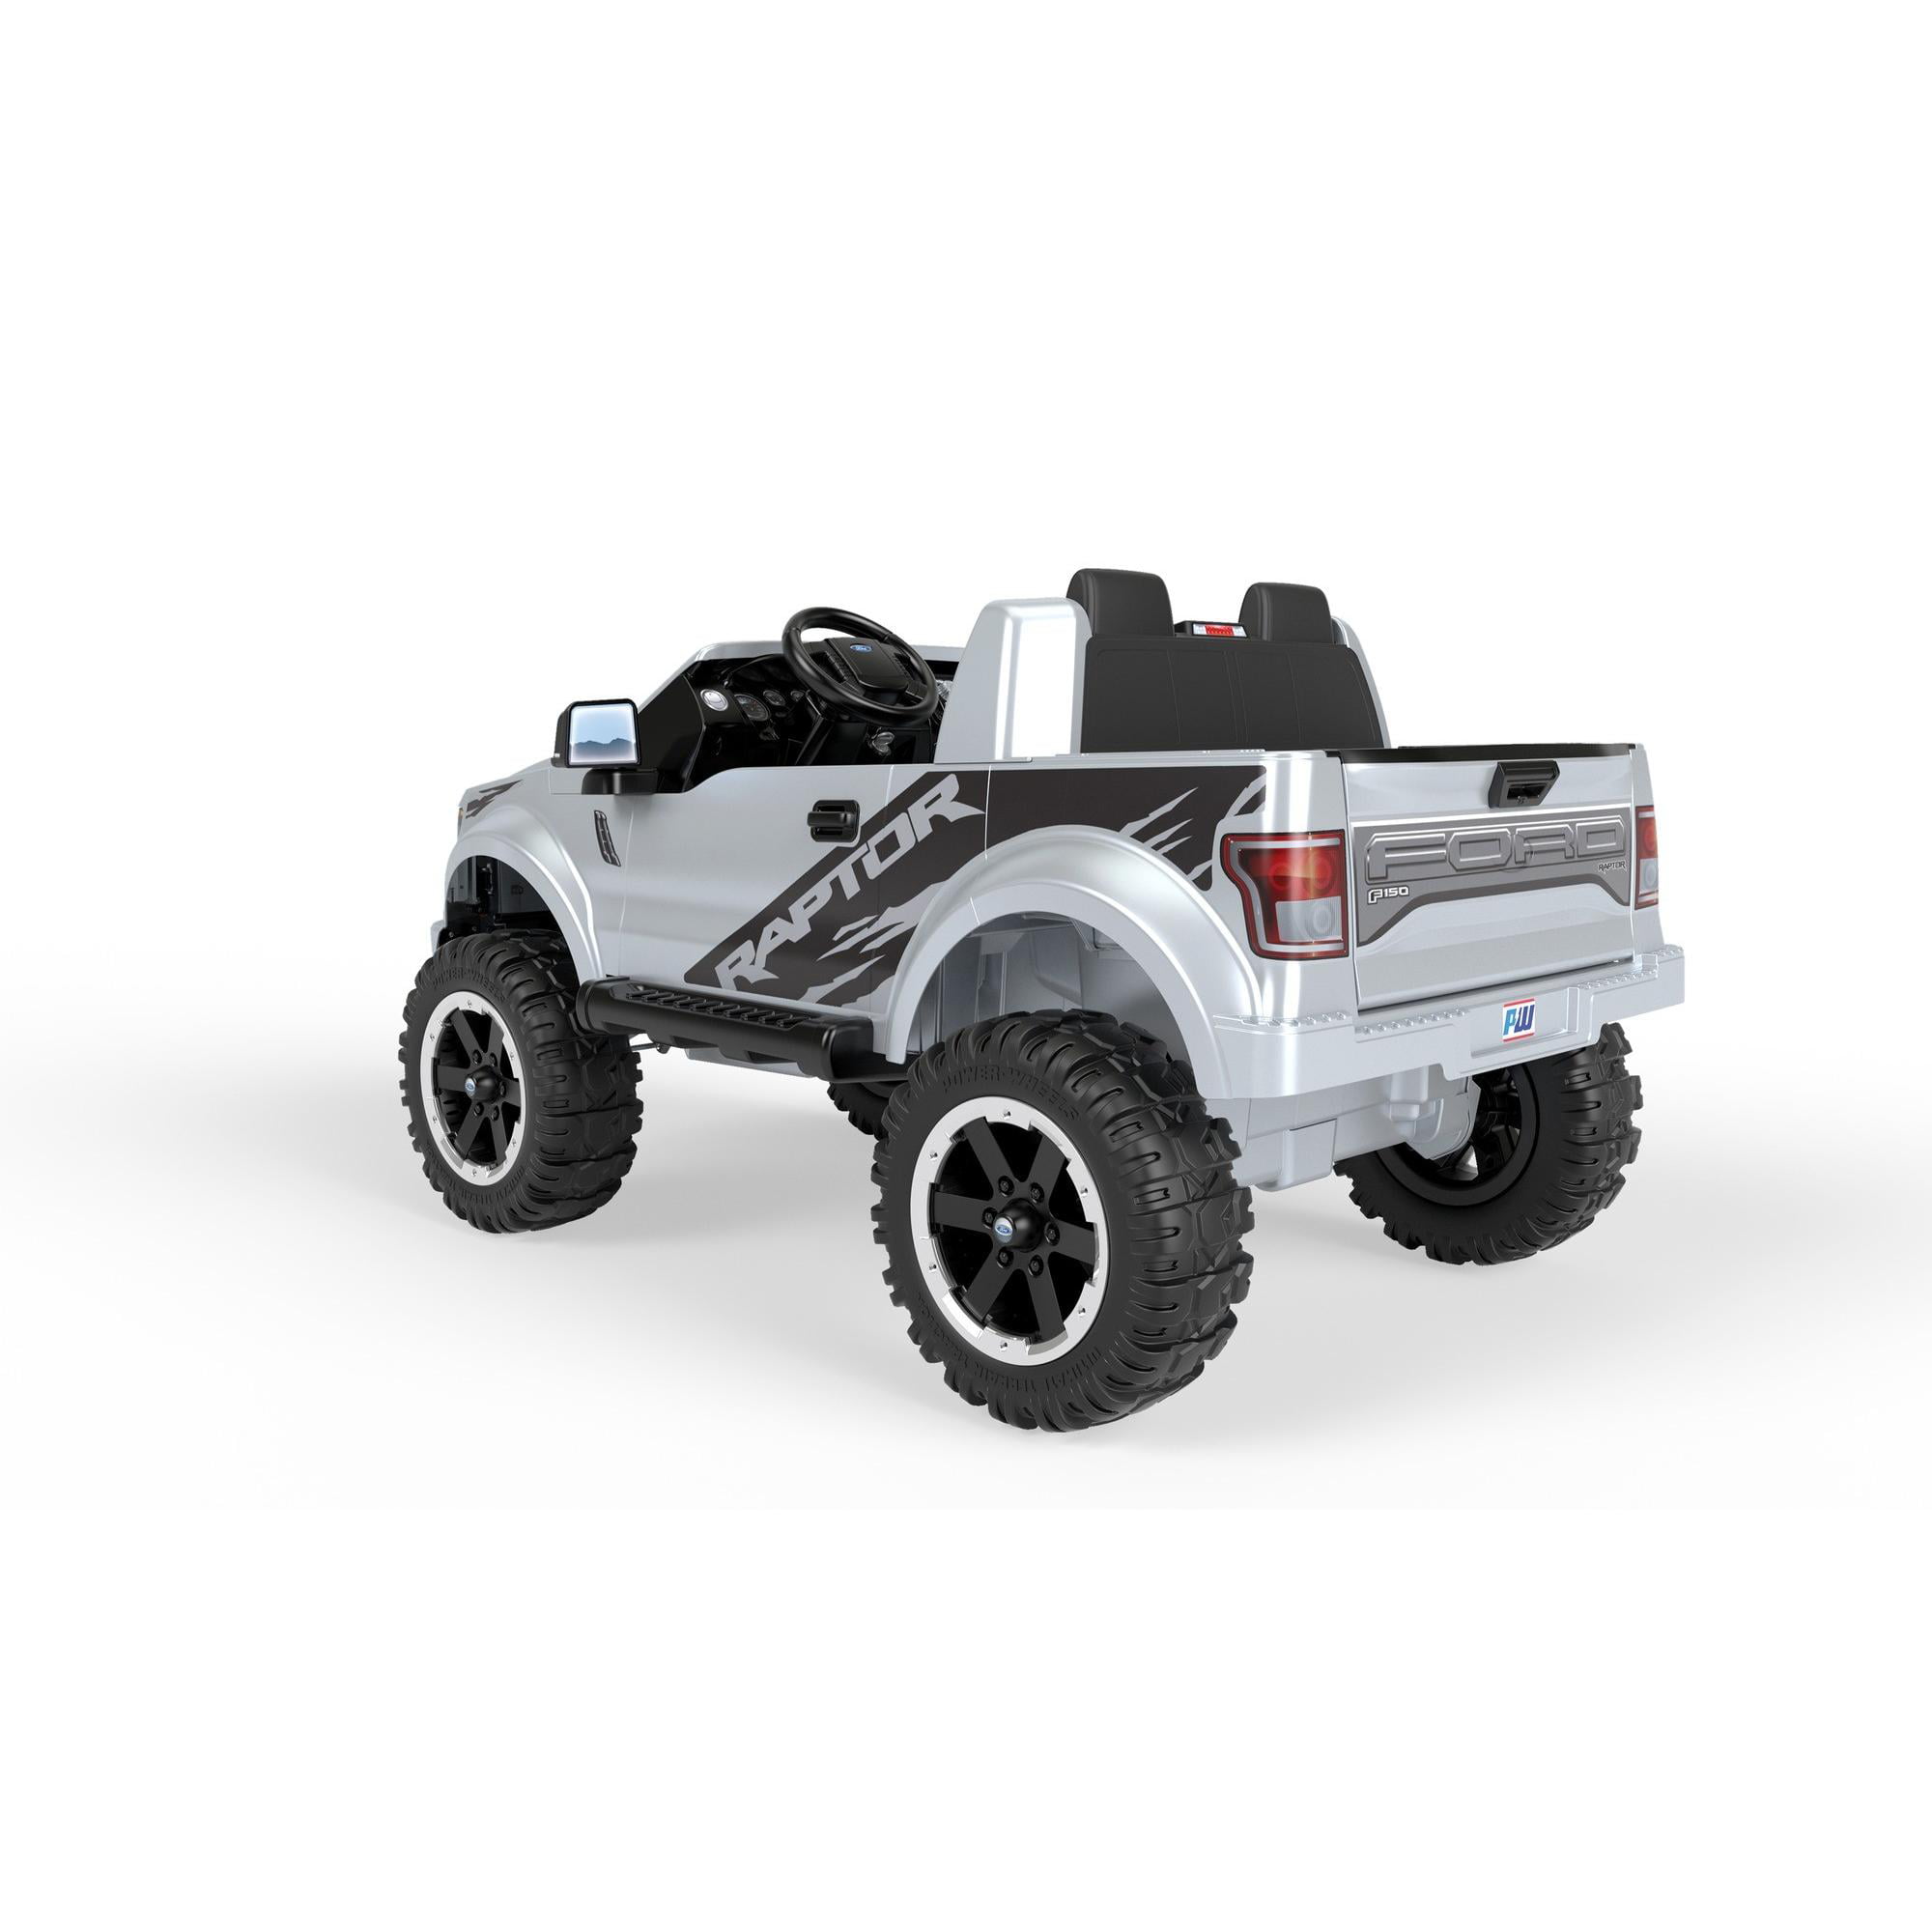 Power Wheels Ford F 150 Raptor Extreme With Lifted Body Walmart Com